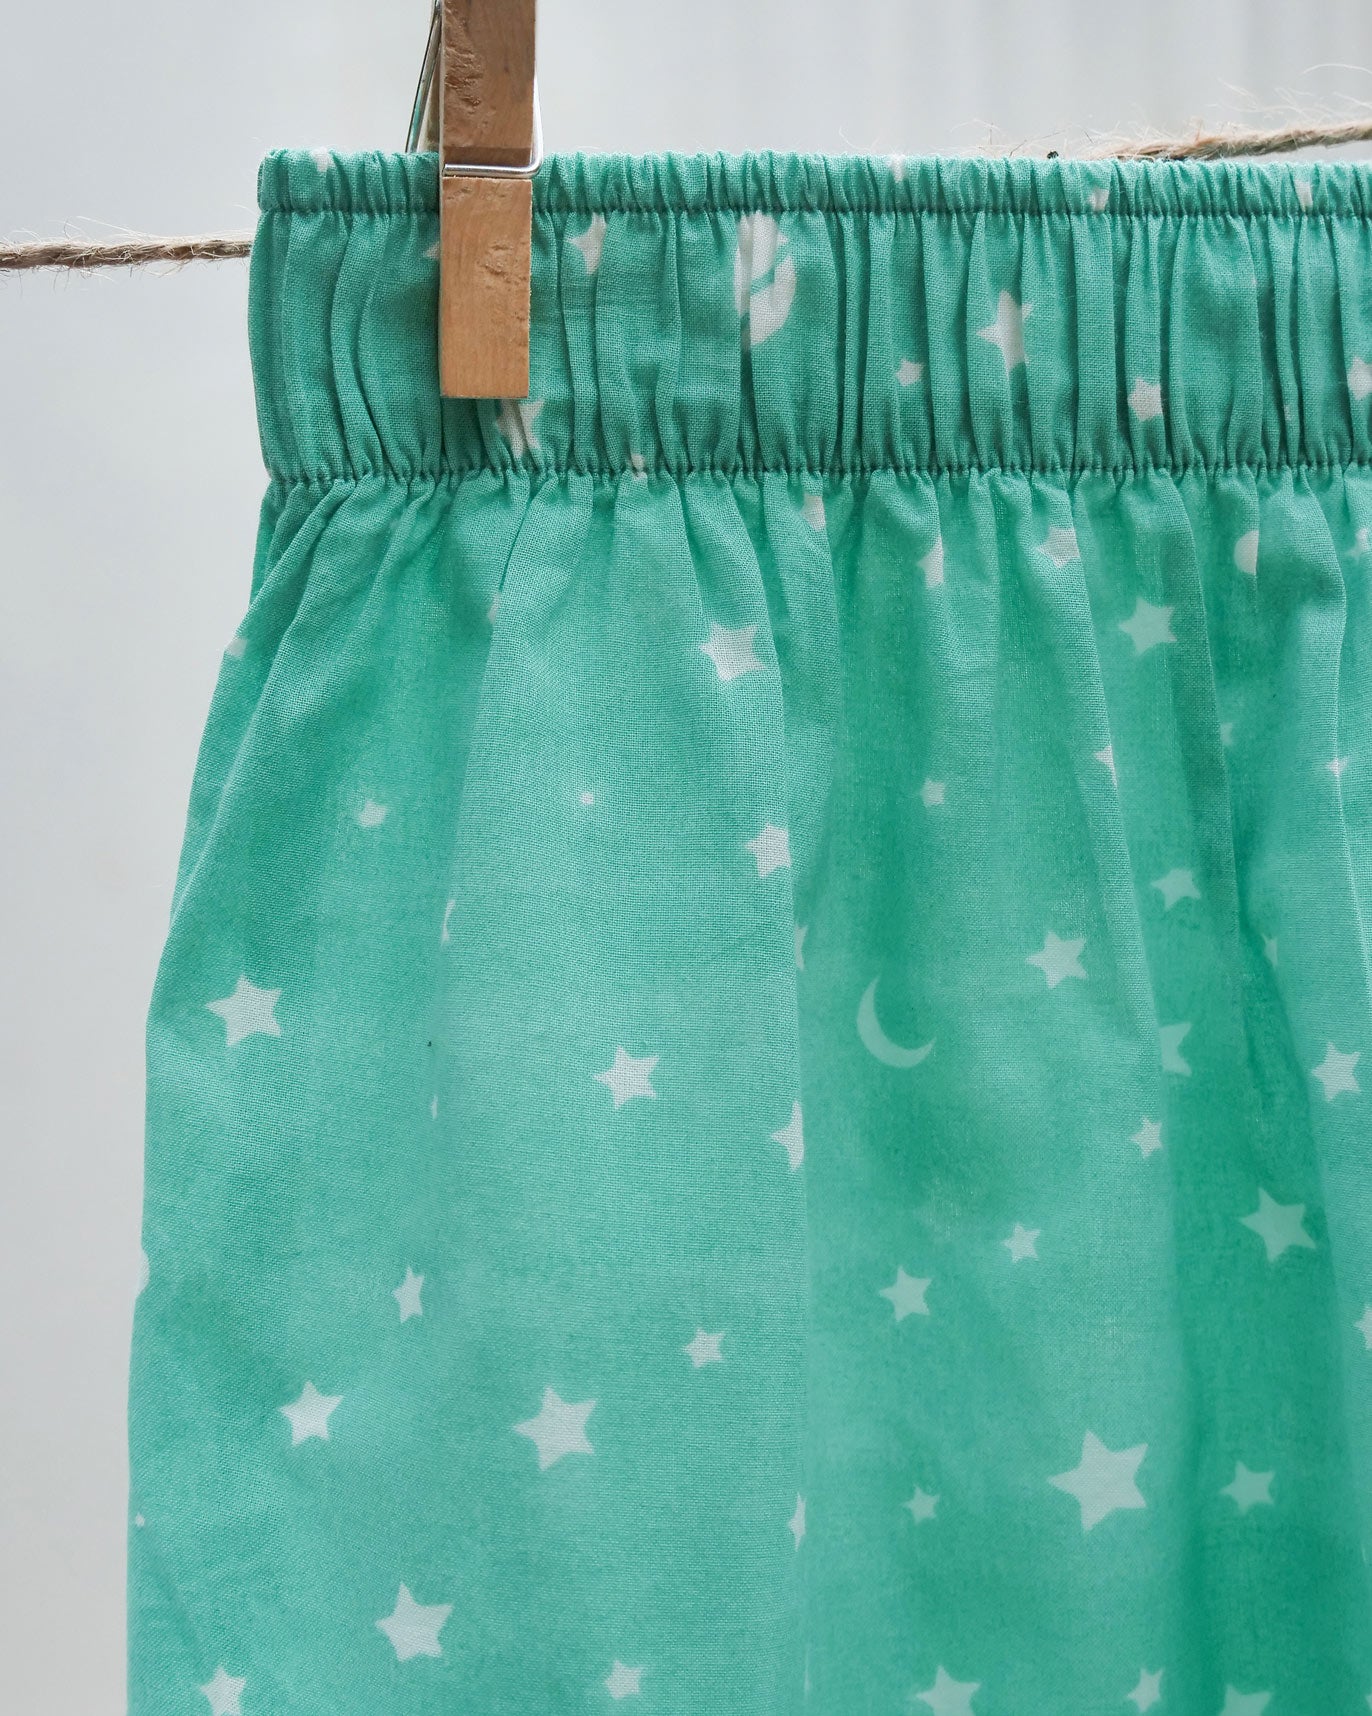 All The Stars Boxers - White & Turquoise